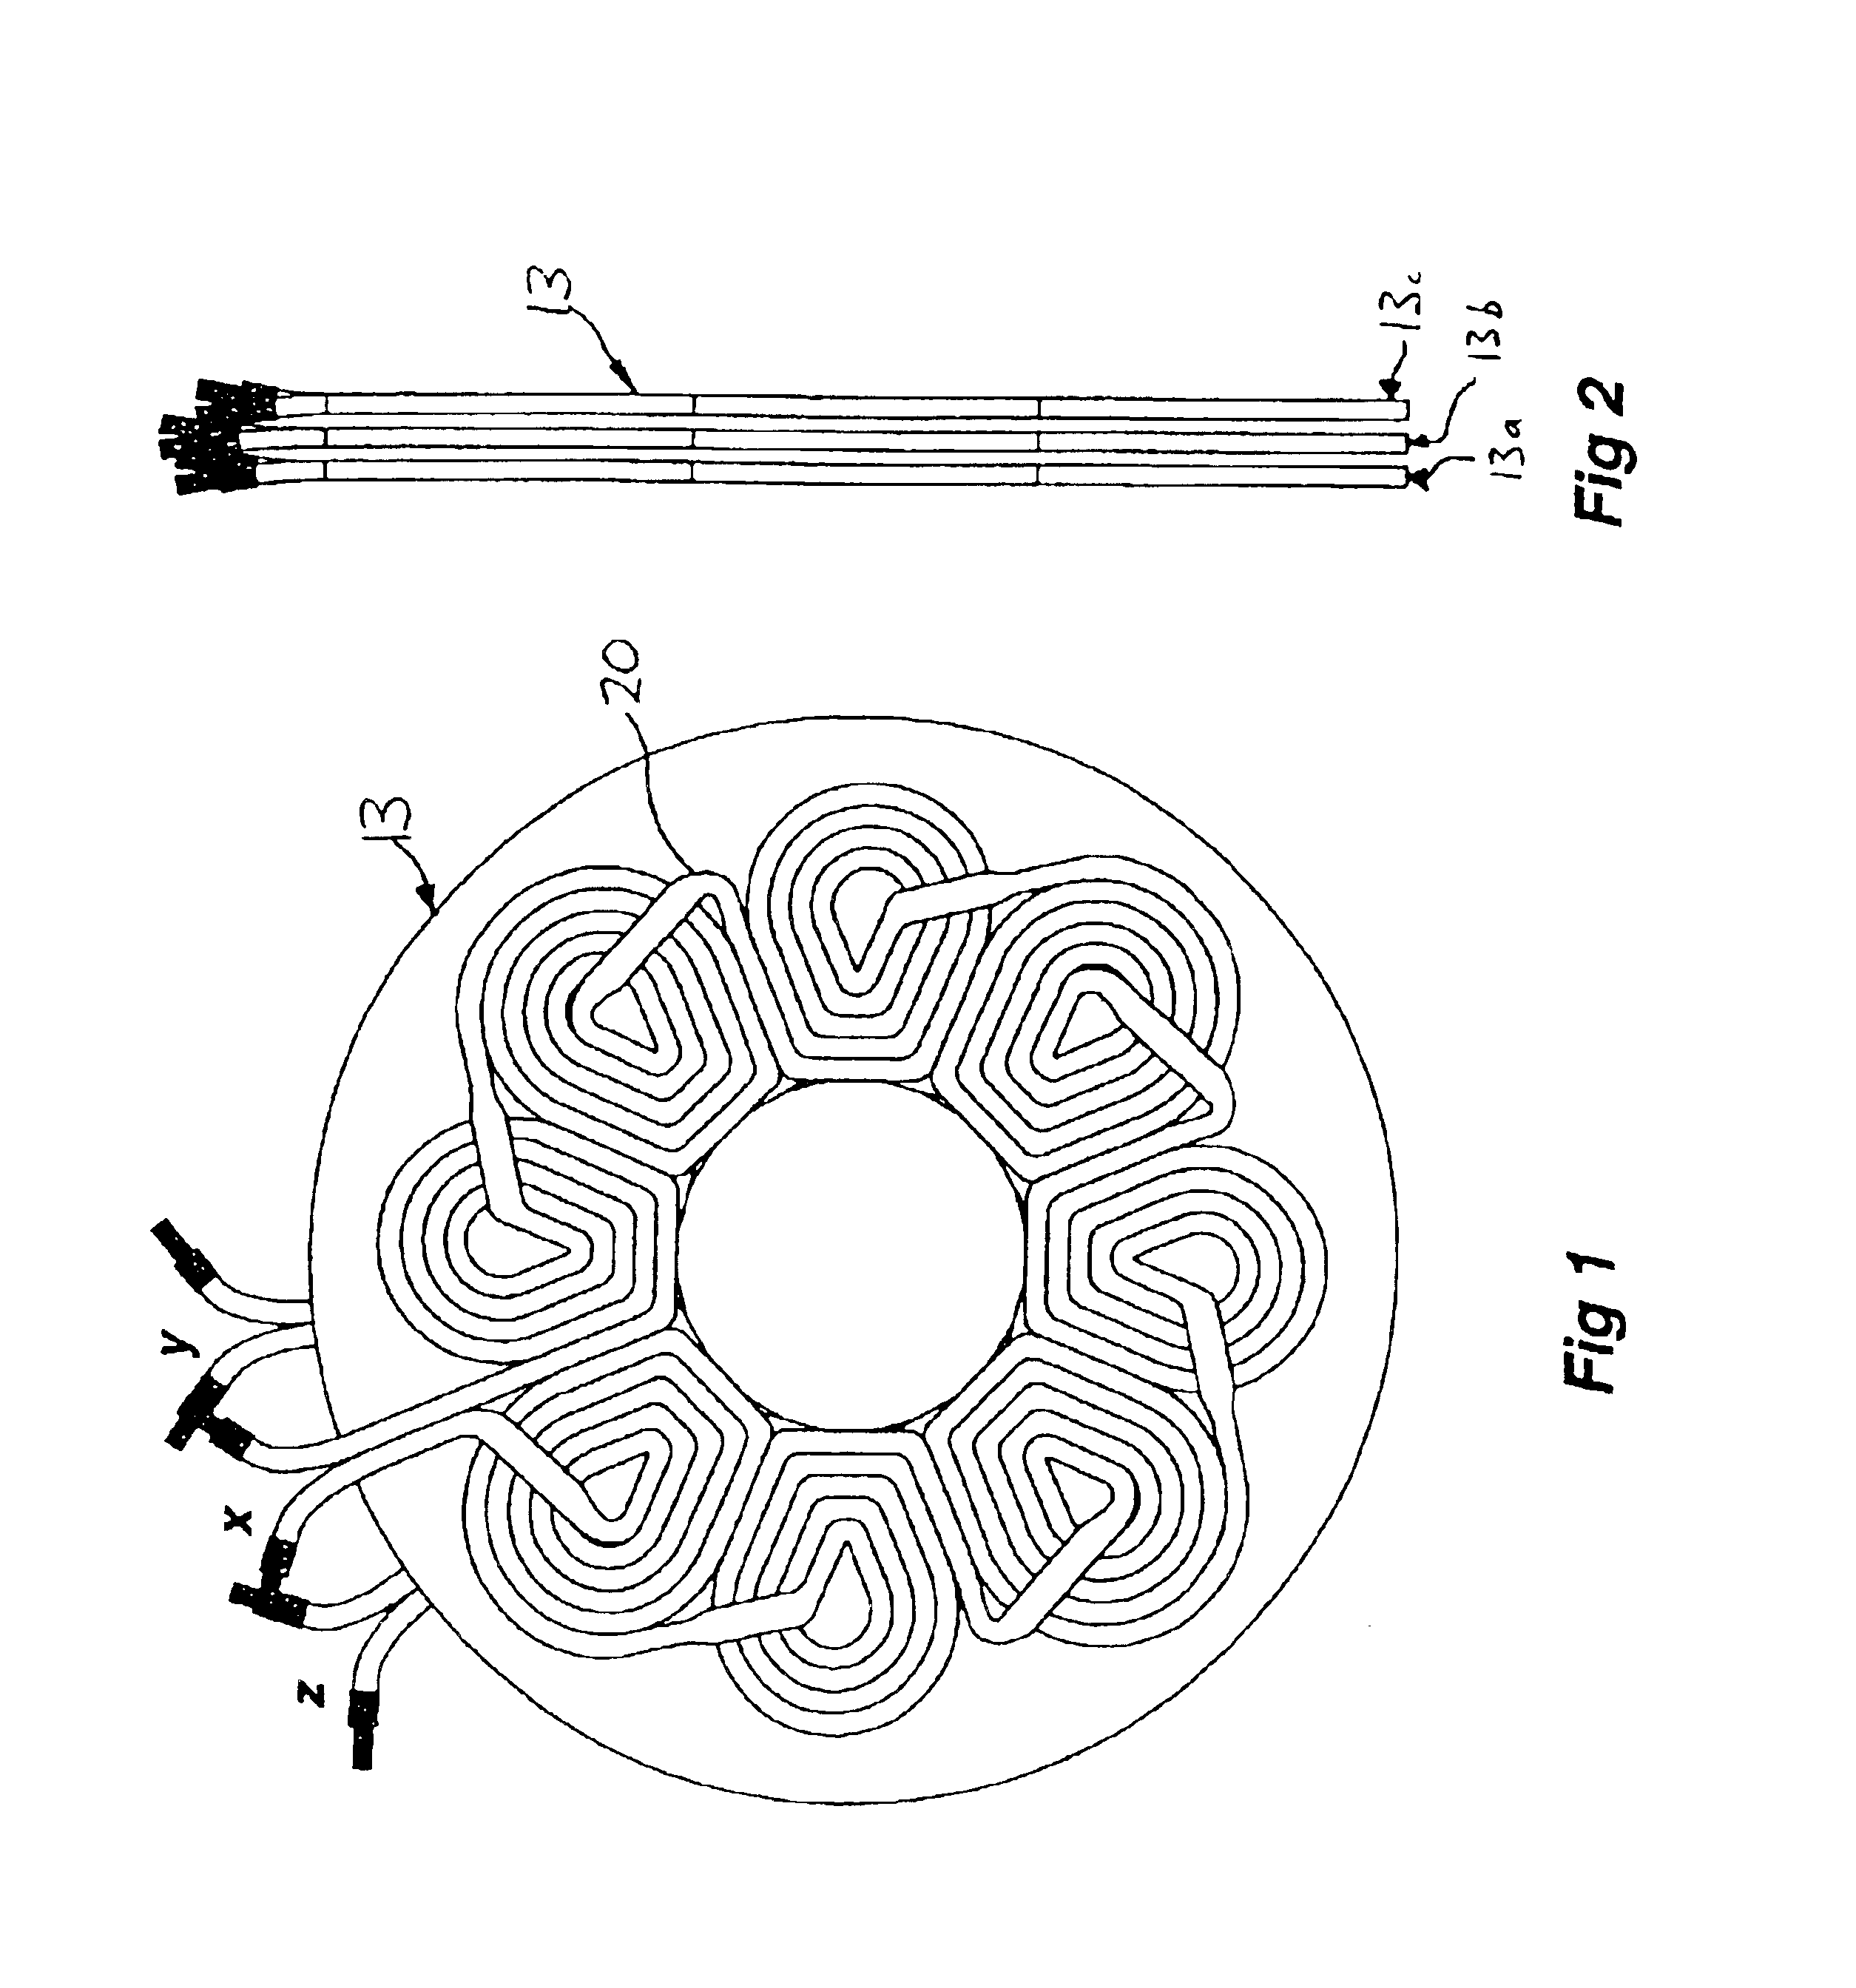 Method of forming a winding disc for an axial field electrical machine